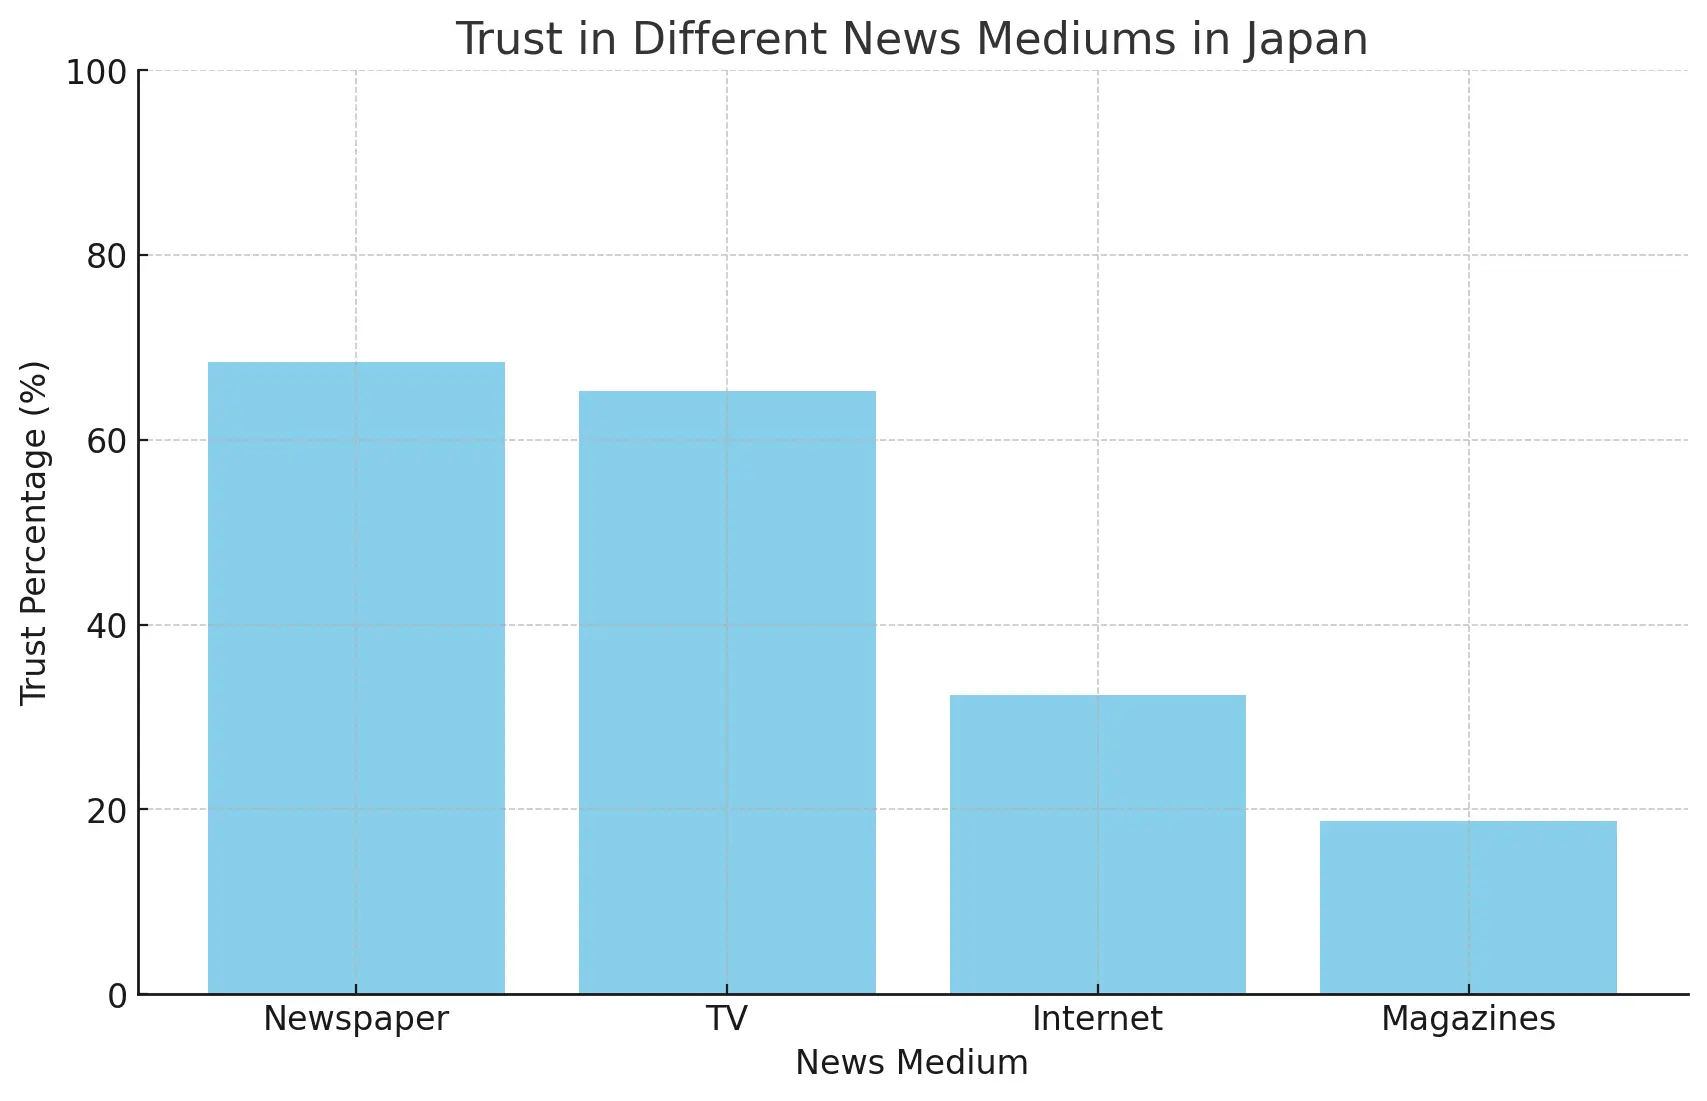 Trust in different news mediums in Japan